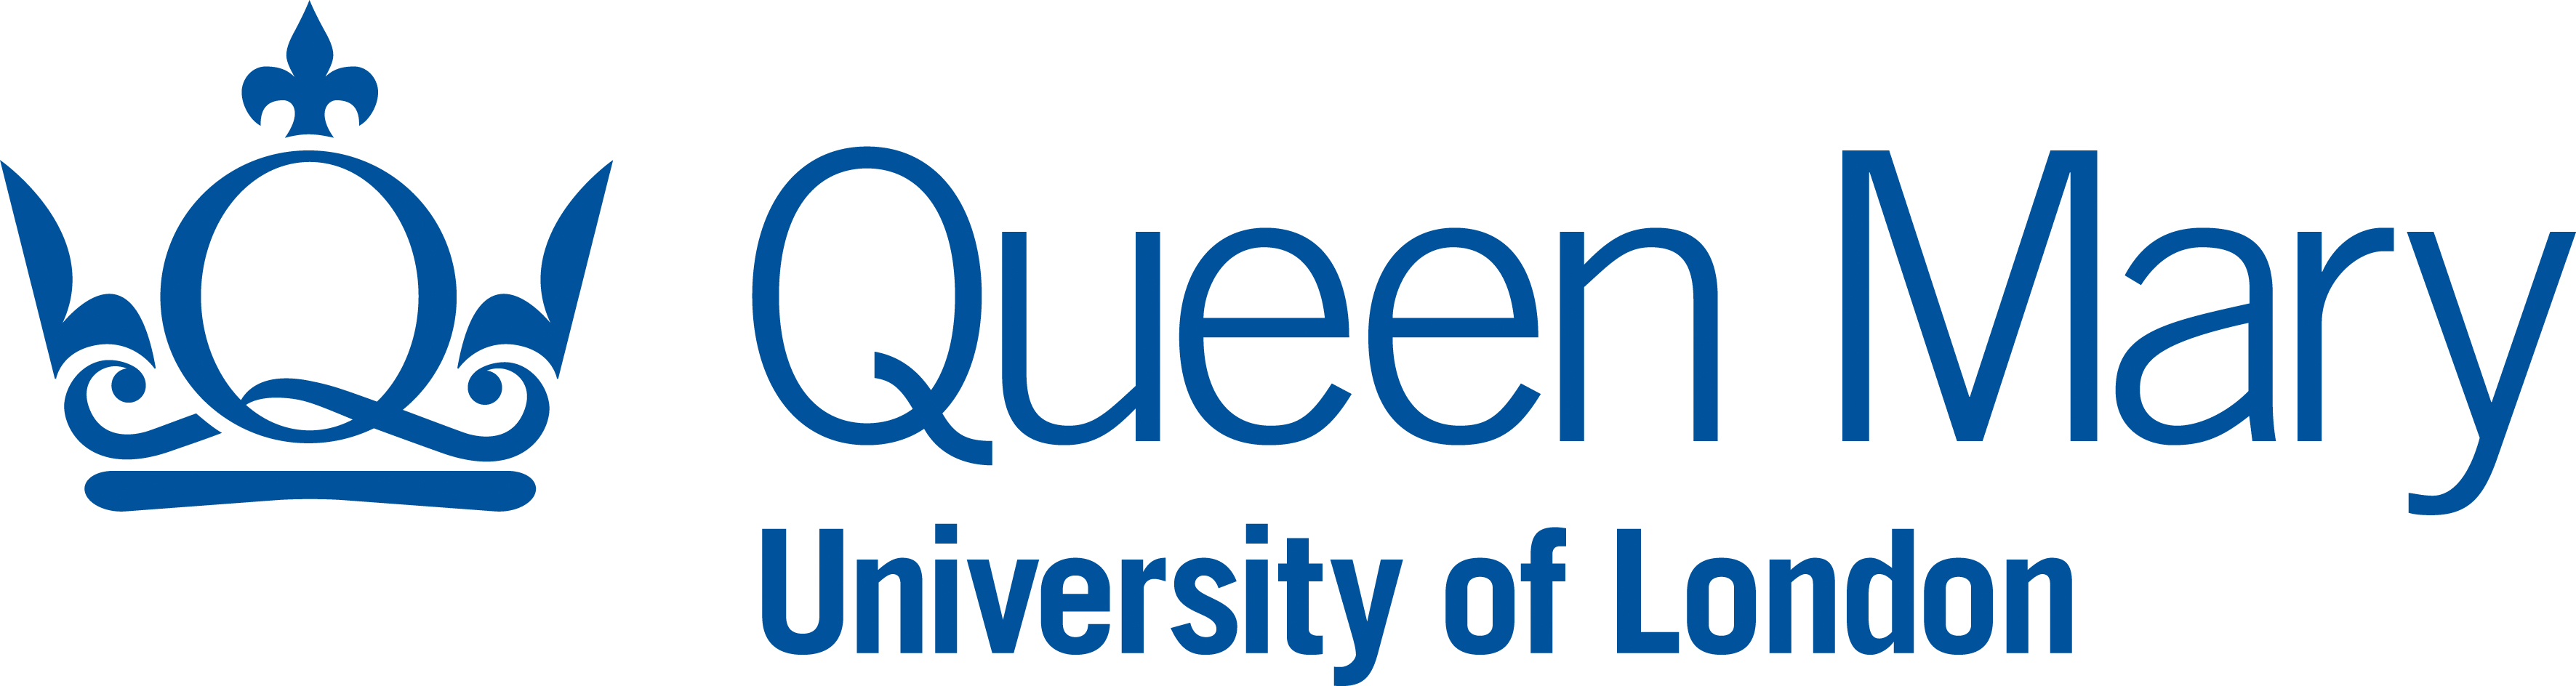 Queen Mary University of London logo. A blue crown with the words Queen Mary University of London.